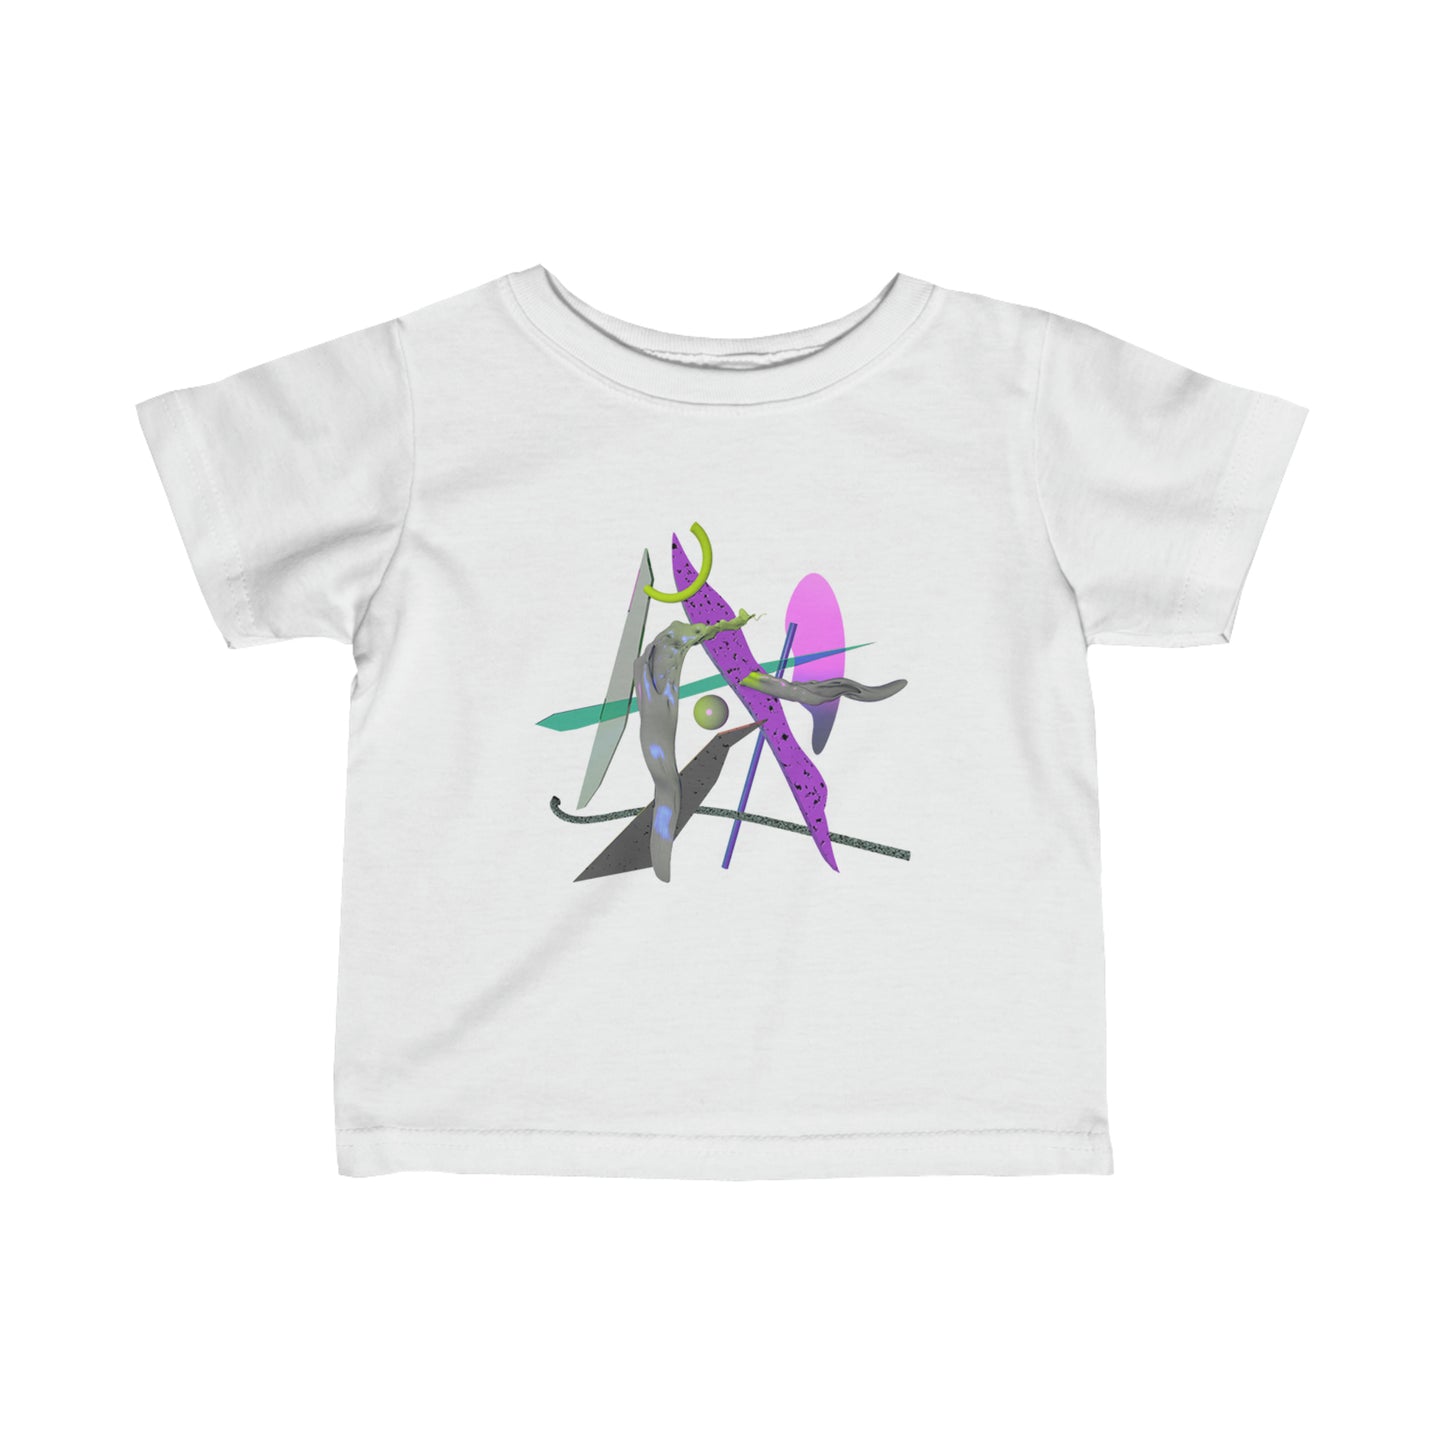 Post-Abstract Infant T-Shirt